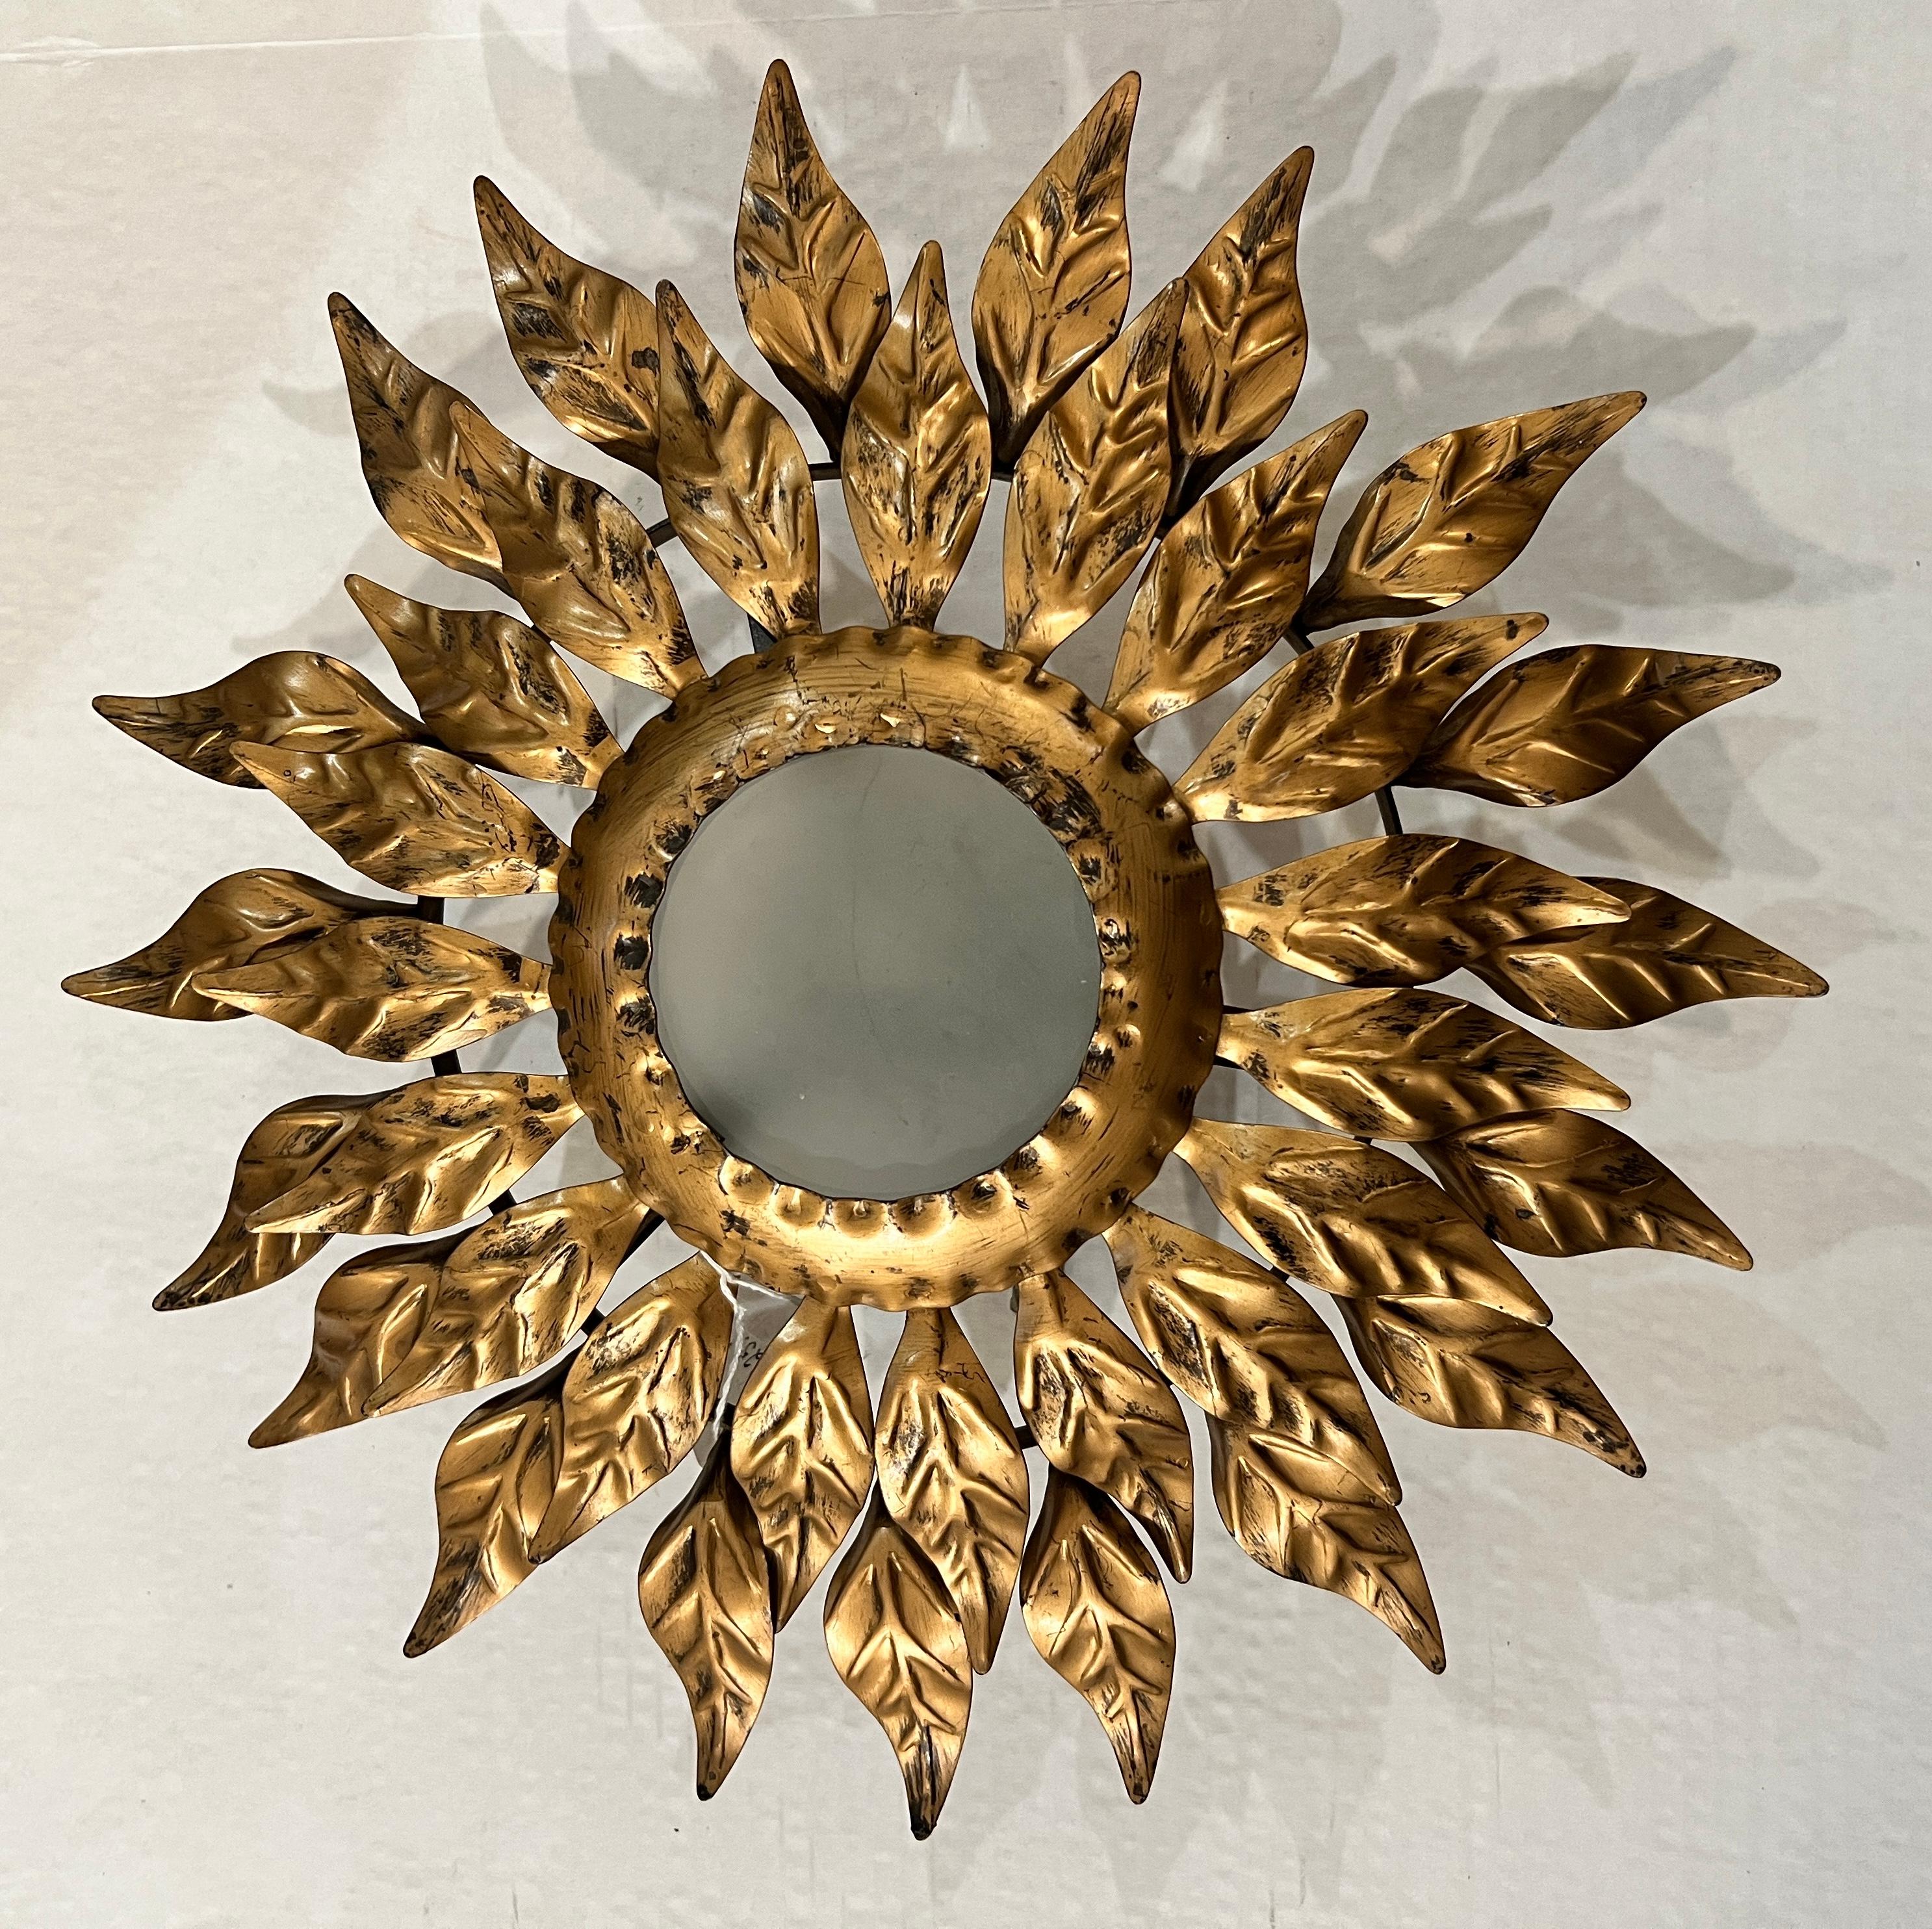 A gilt metal sunflower form light with opaque glass. All wiring has been updated for U.S. standards. The light can hand as a wall sconce or ceiling fixture


Markings on the socket:  125v 75w
Leviton Nom 057 Switch 